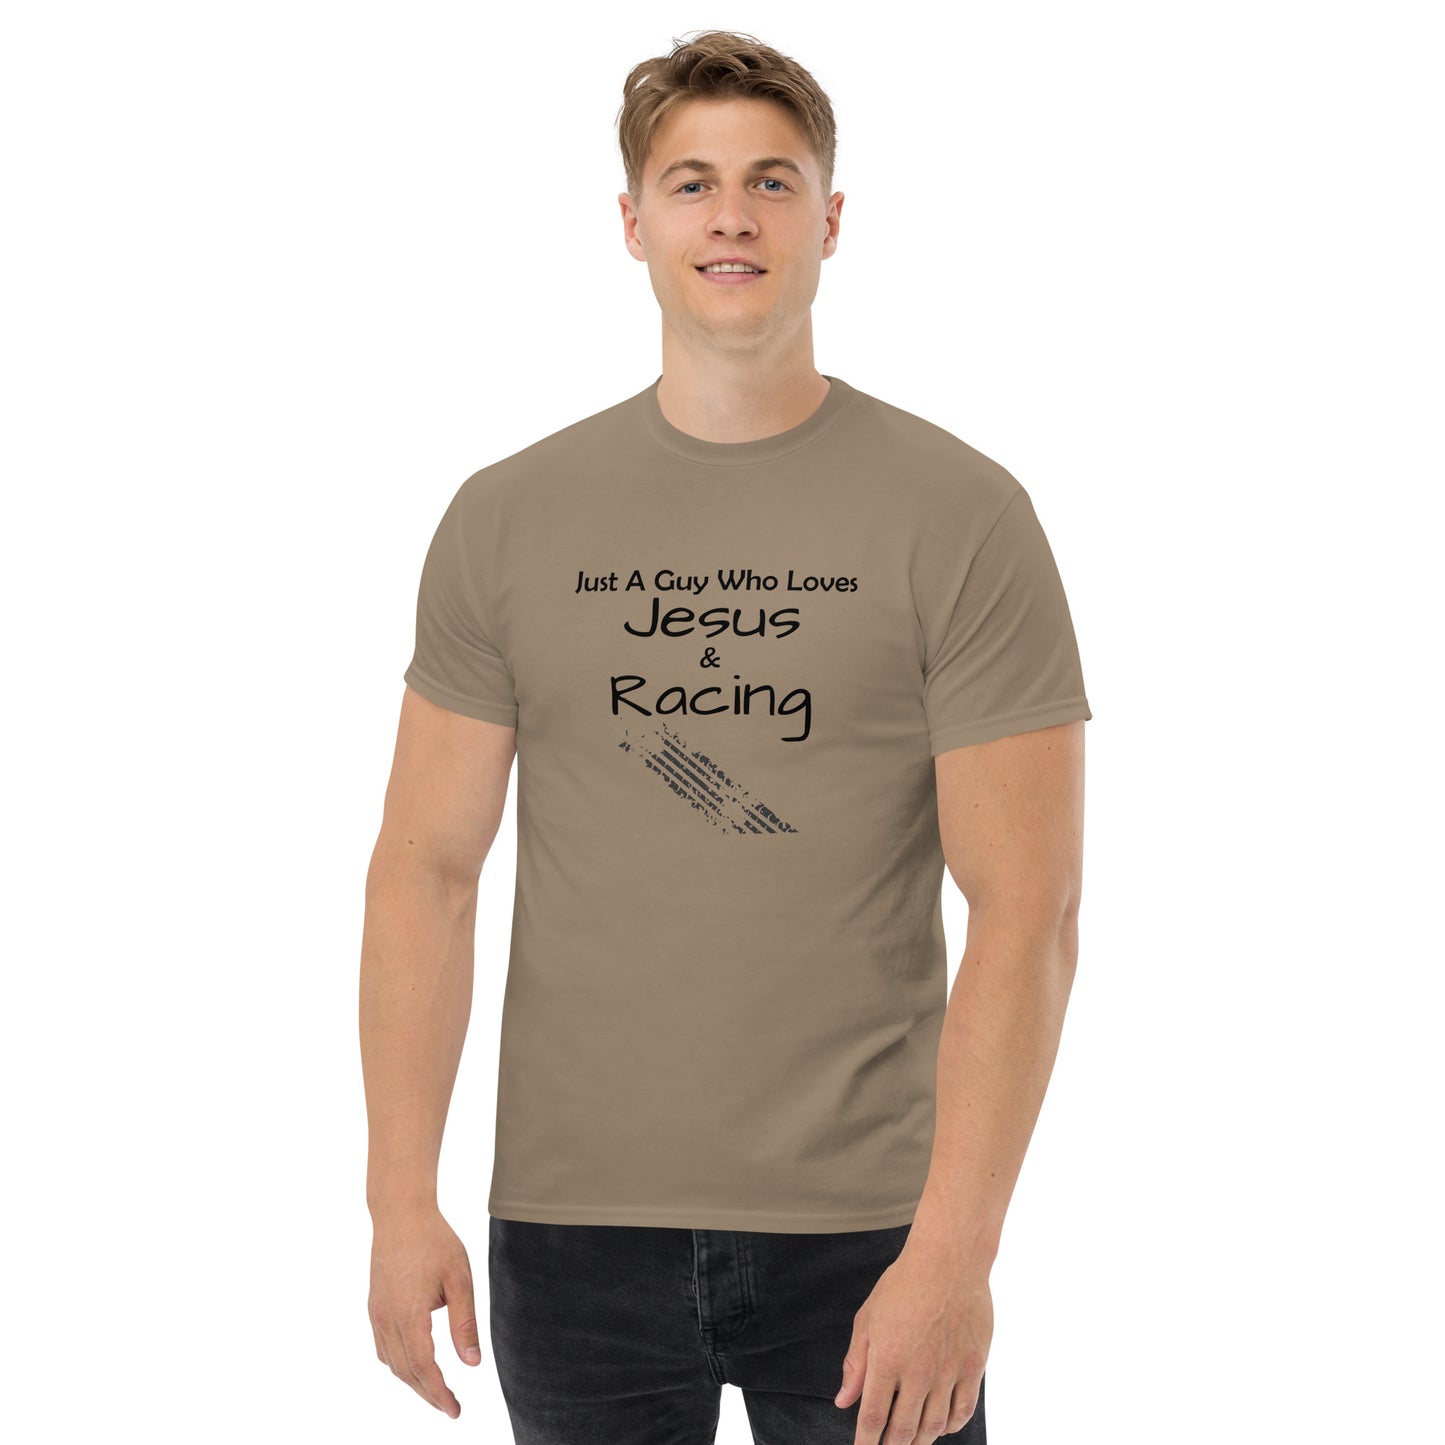 "Just A Guy Who Loves Jesus & Racing" T-Shirt - Weave Got Gifts - Unique Gifts You Won’t Find Anywhere Else!